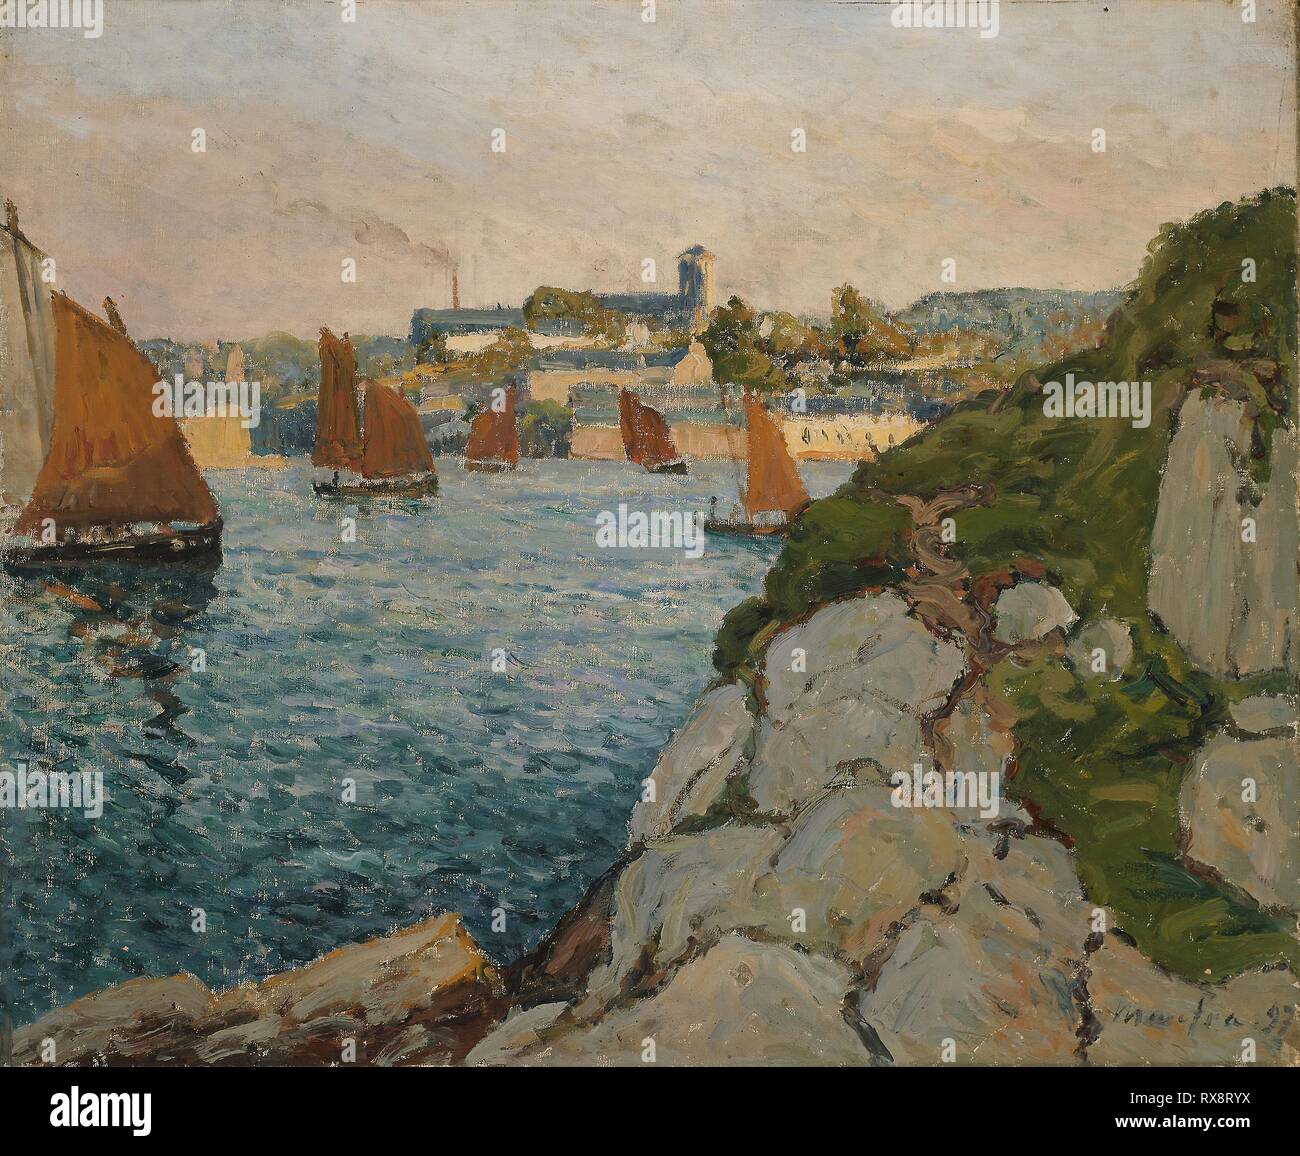 Douarnenez in Sunshine. Maxime Maufra; French, 1861-1918. Date: 1897. Dimensions: 59.7 × 73.7 cm (23 1/2 × 29 in.). Oil on canvas. Origin: France. Museum: The Chicago Art Institute. Stock Photo